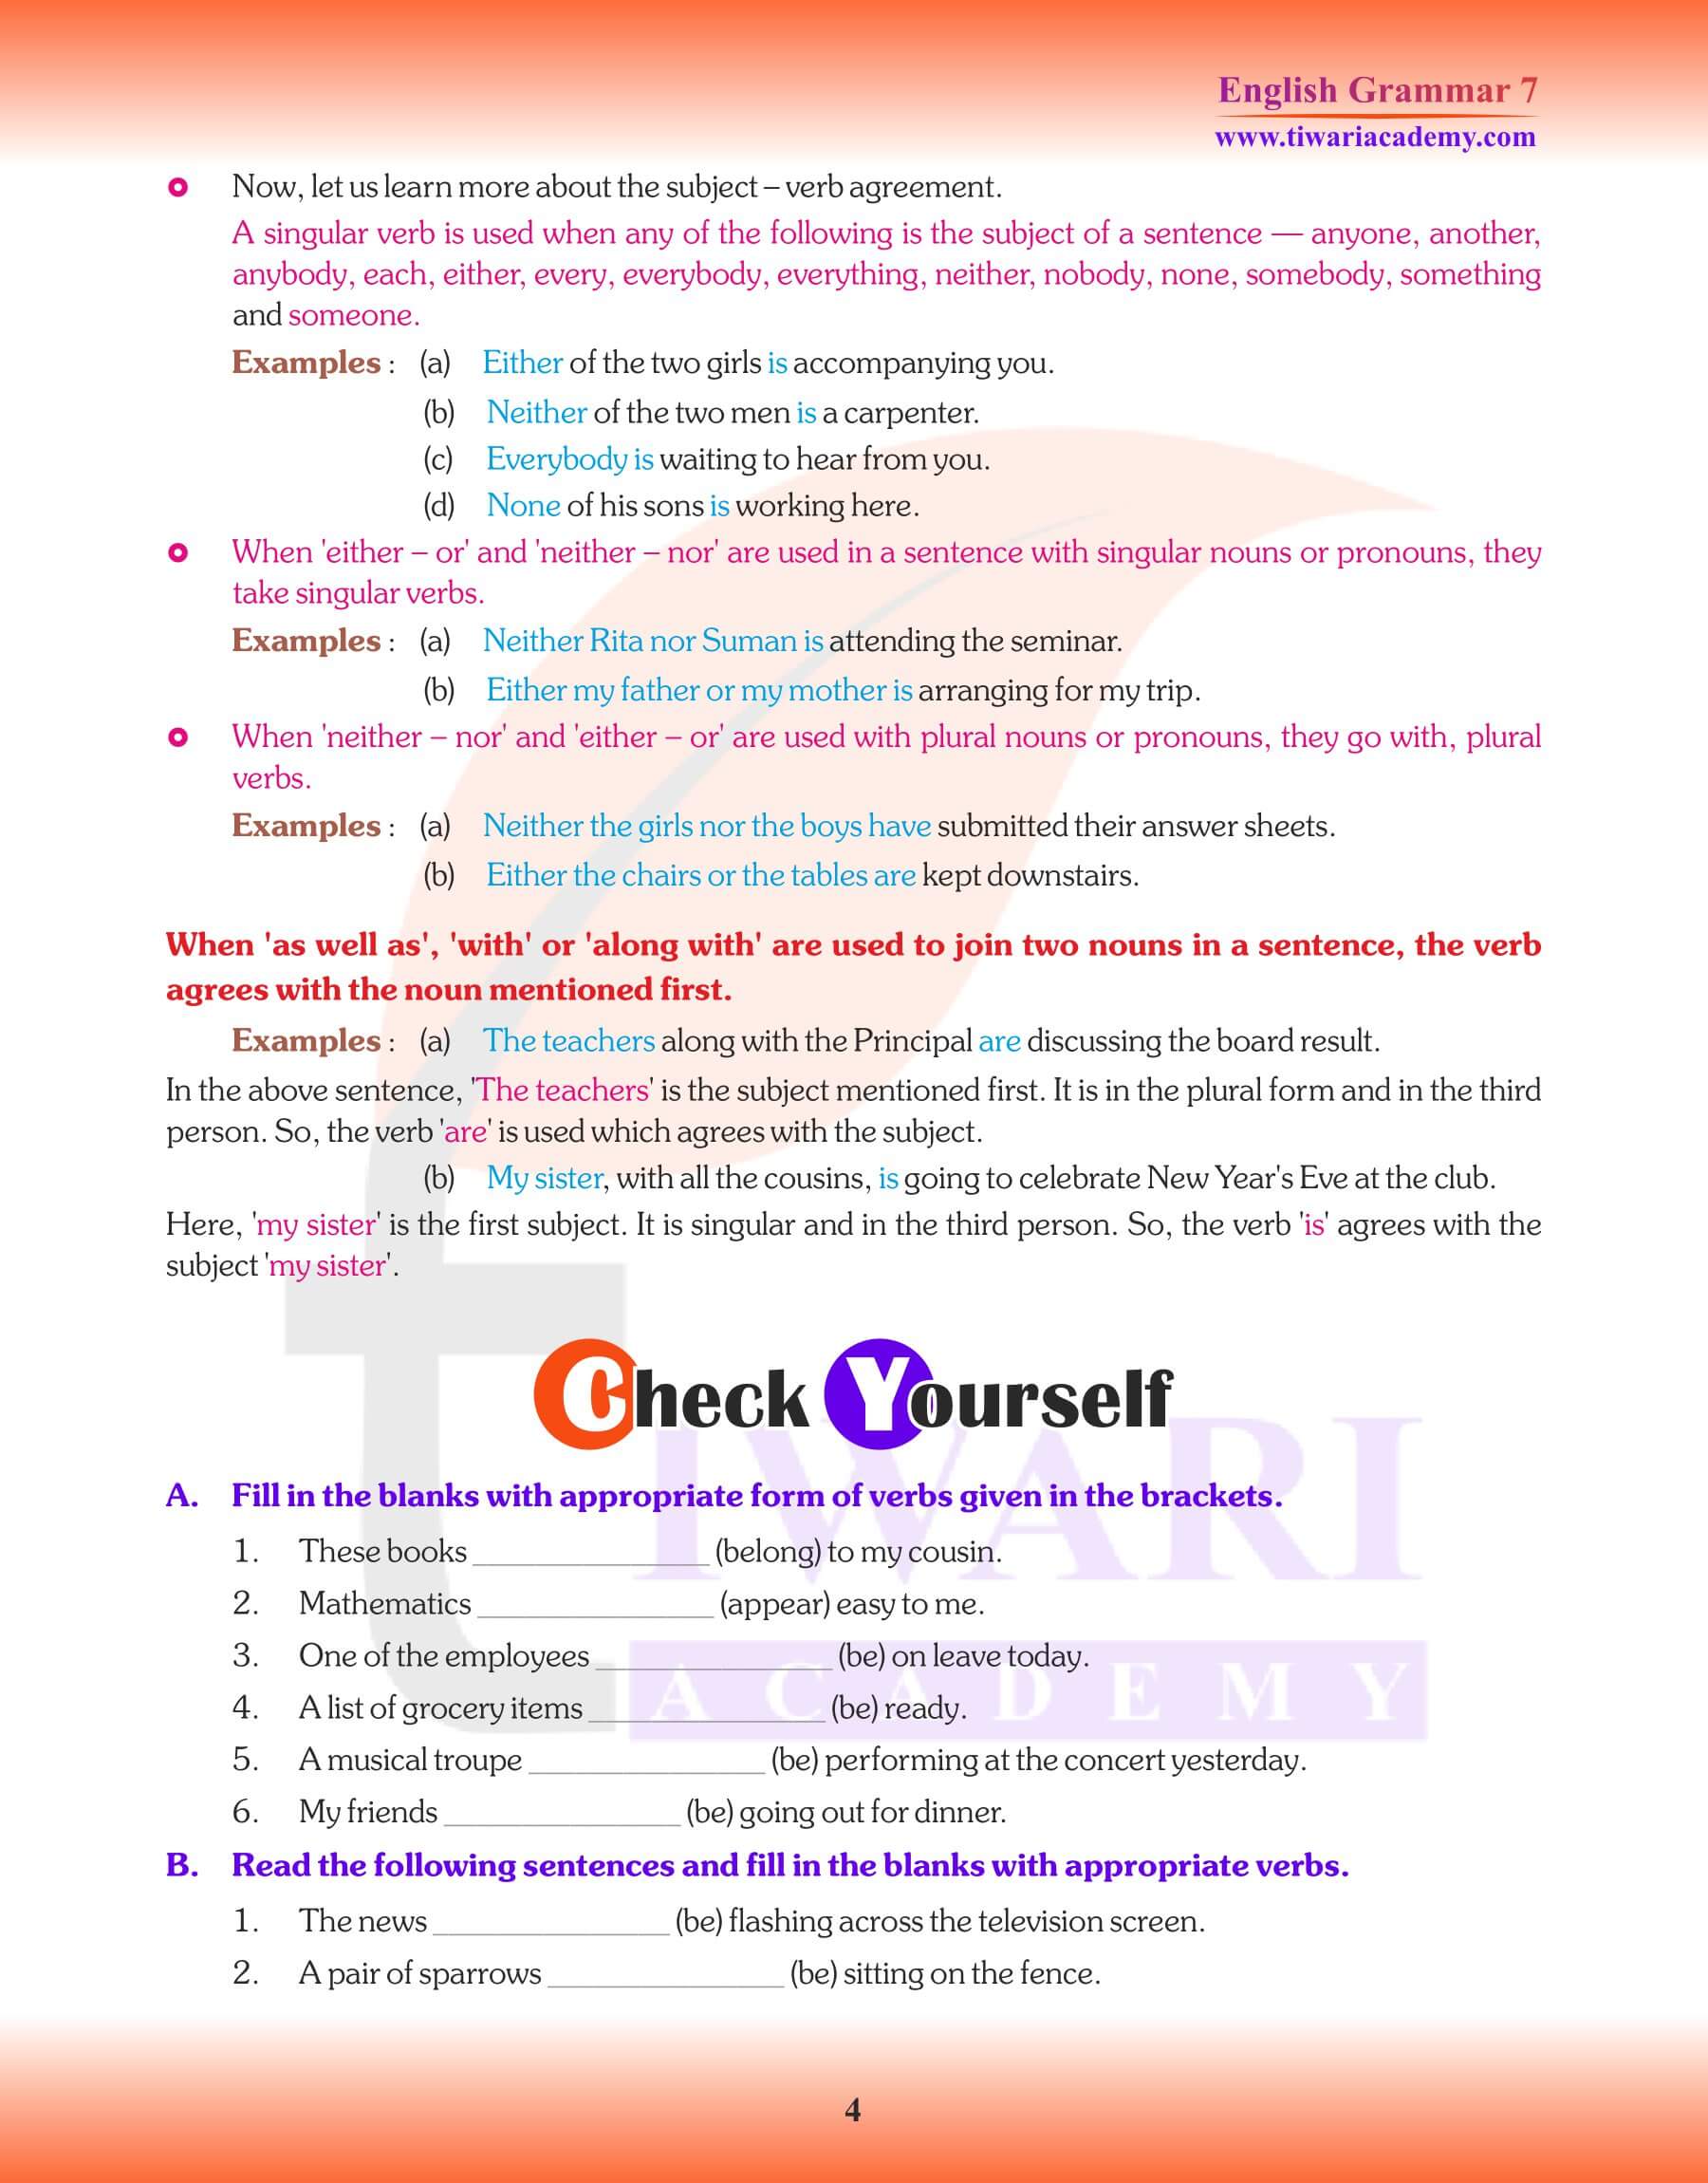 Class 7 English Grammar Chapter 10 Revision book